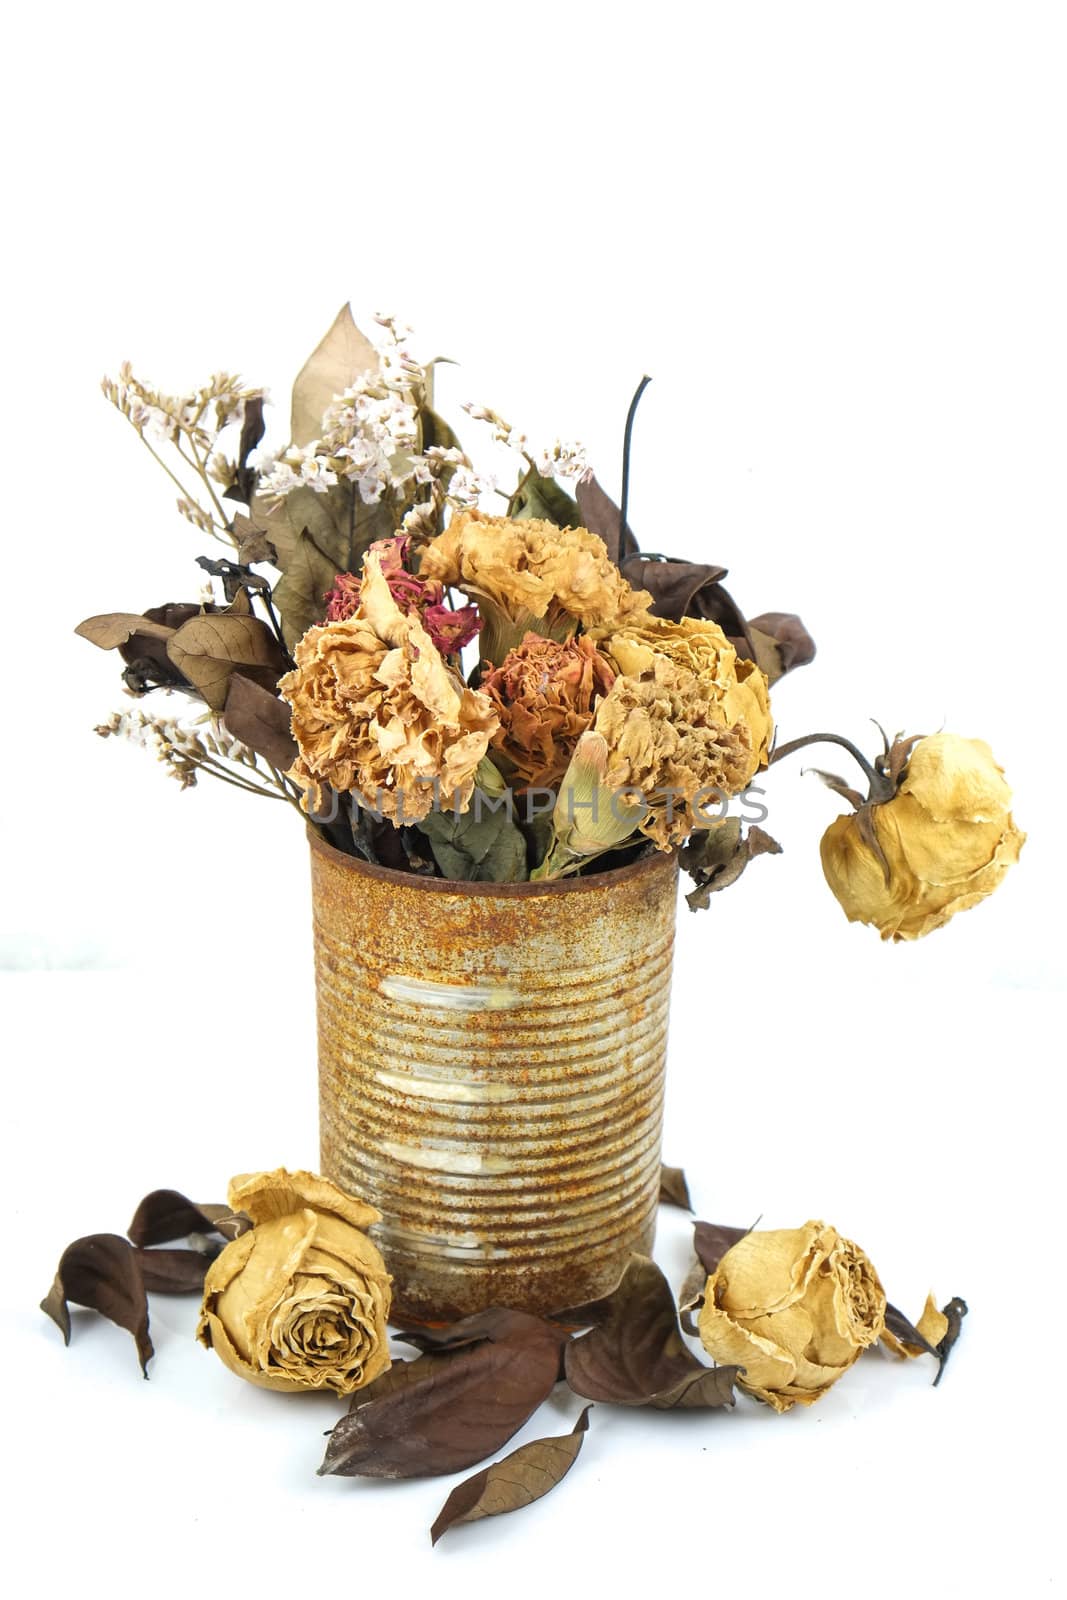 dry flowers in tin can by chayathonwong